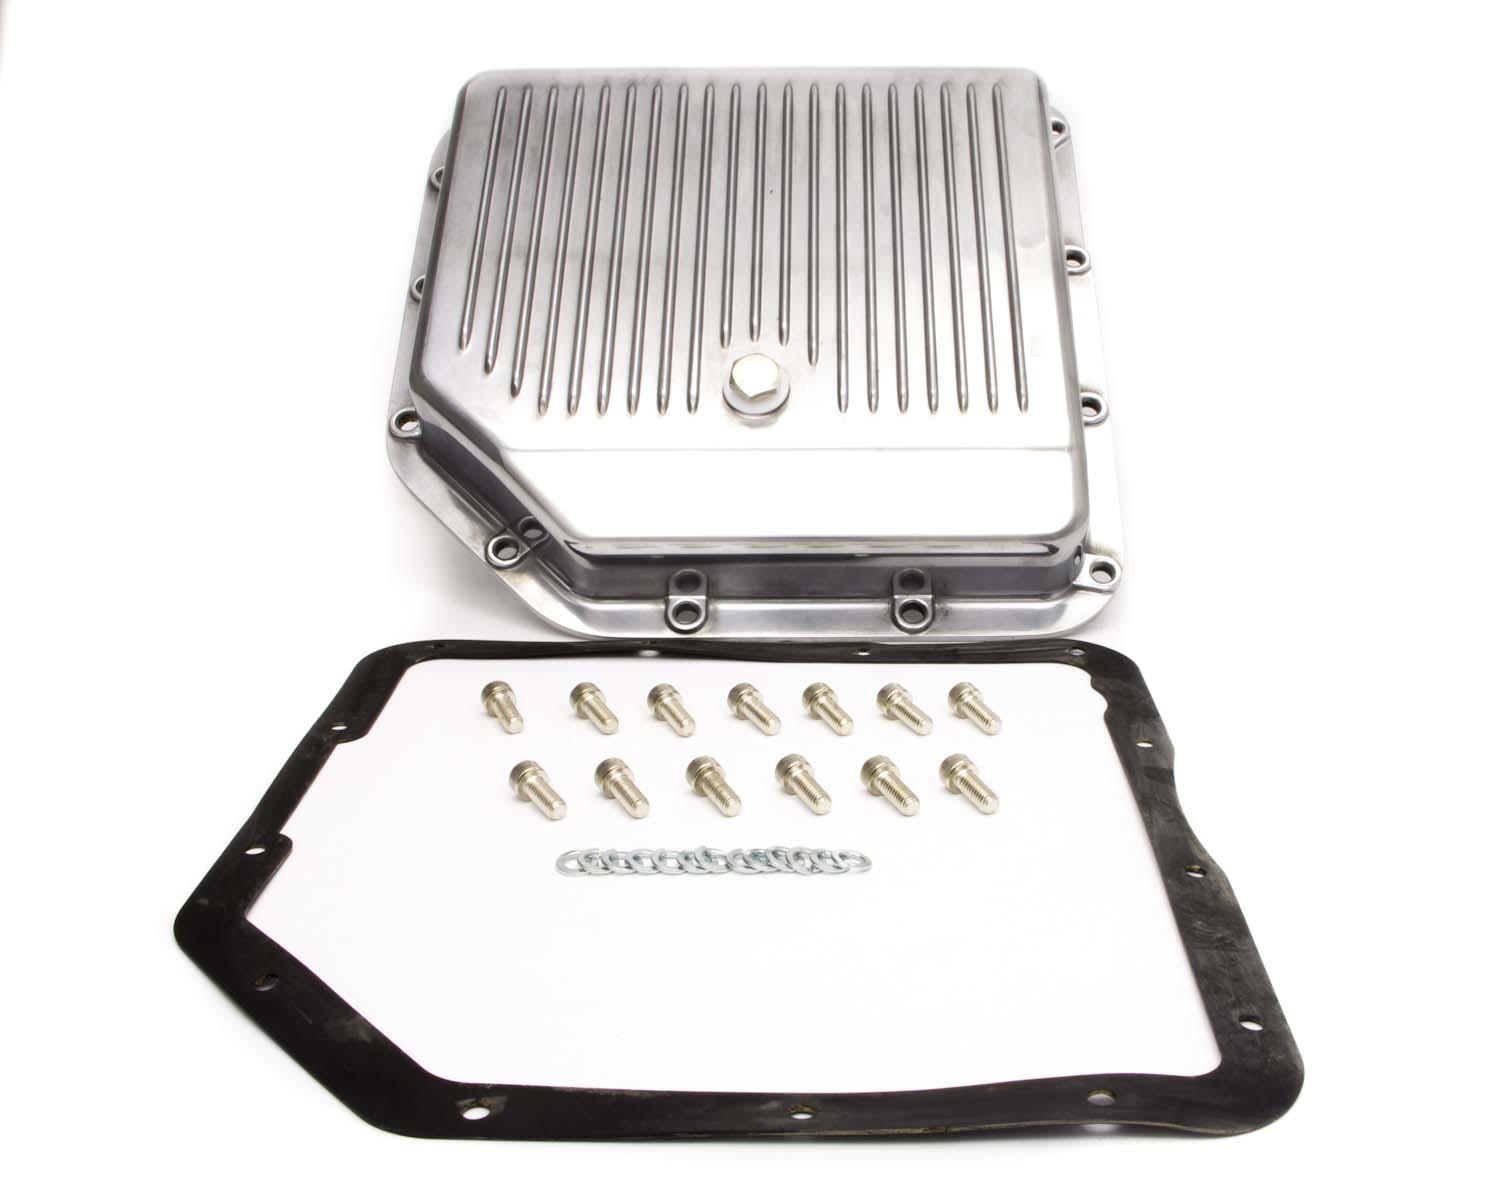 Racing Power Company R8491 Transmission Pan, Stock Depth, Finned, Aluminum, Polished, TH350, Each